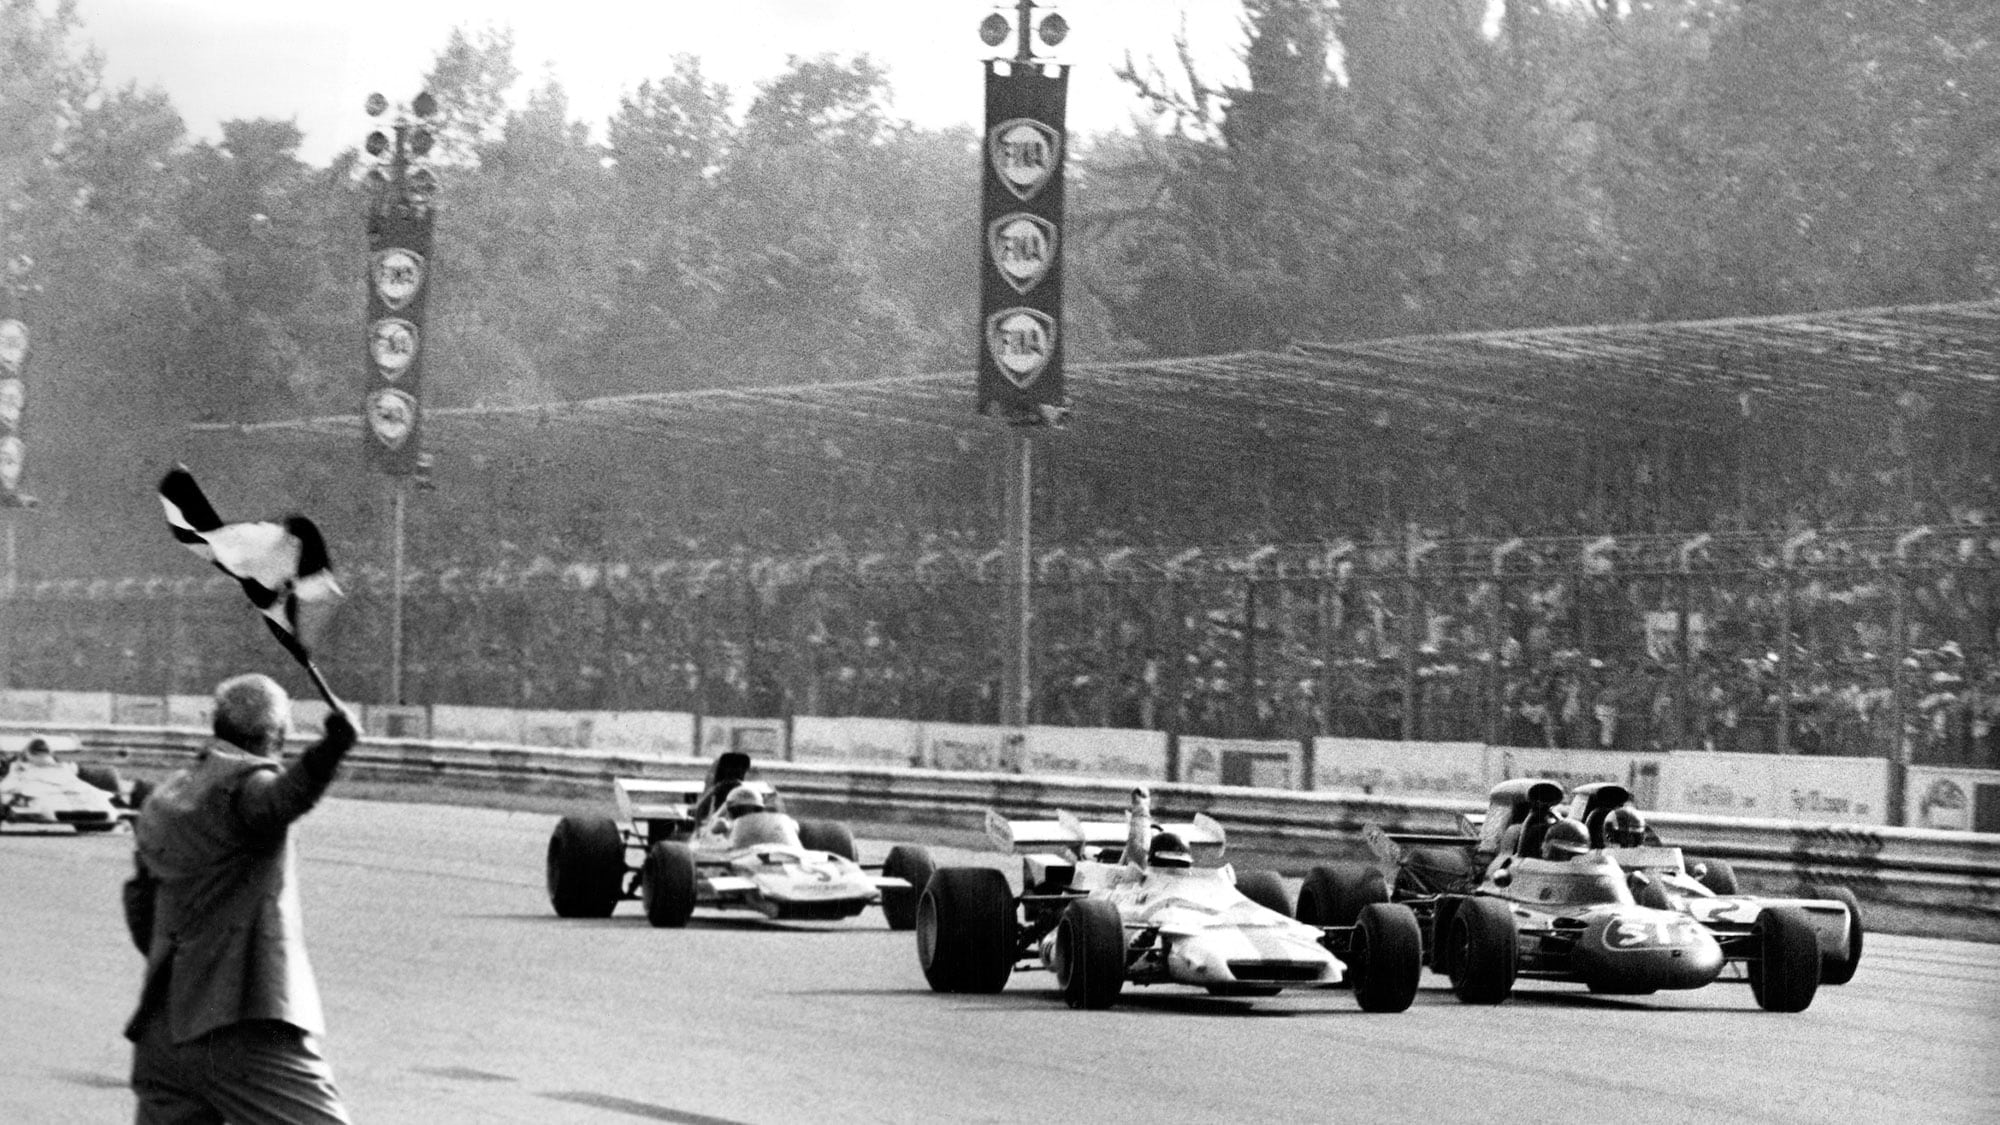 Finish-of-the-1971-Italian-Grand-Prix-showing-Peter-Gethin-with-his-hand-raised-after-winning-by-a-tenth-of-a-second-at-Monza.jpg